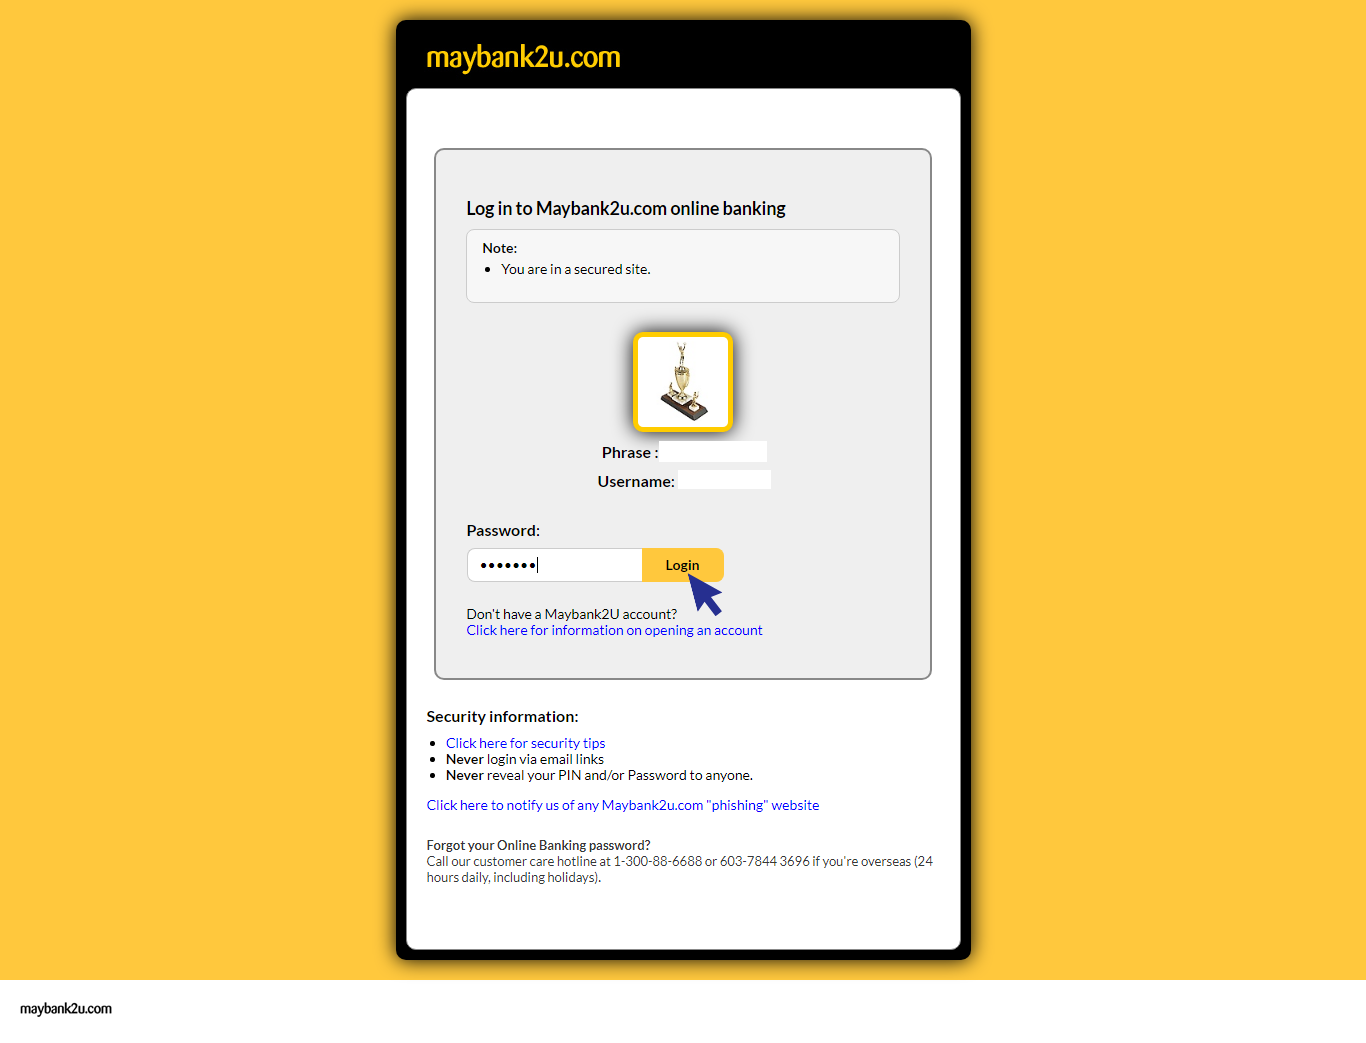 Insert username and password after login maybank2u site